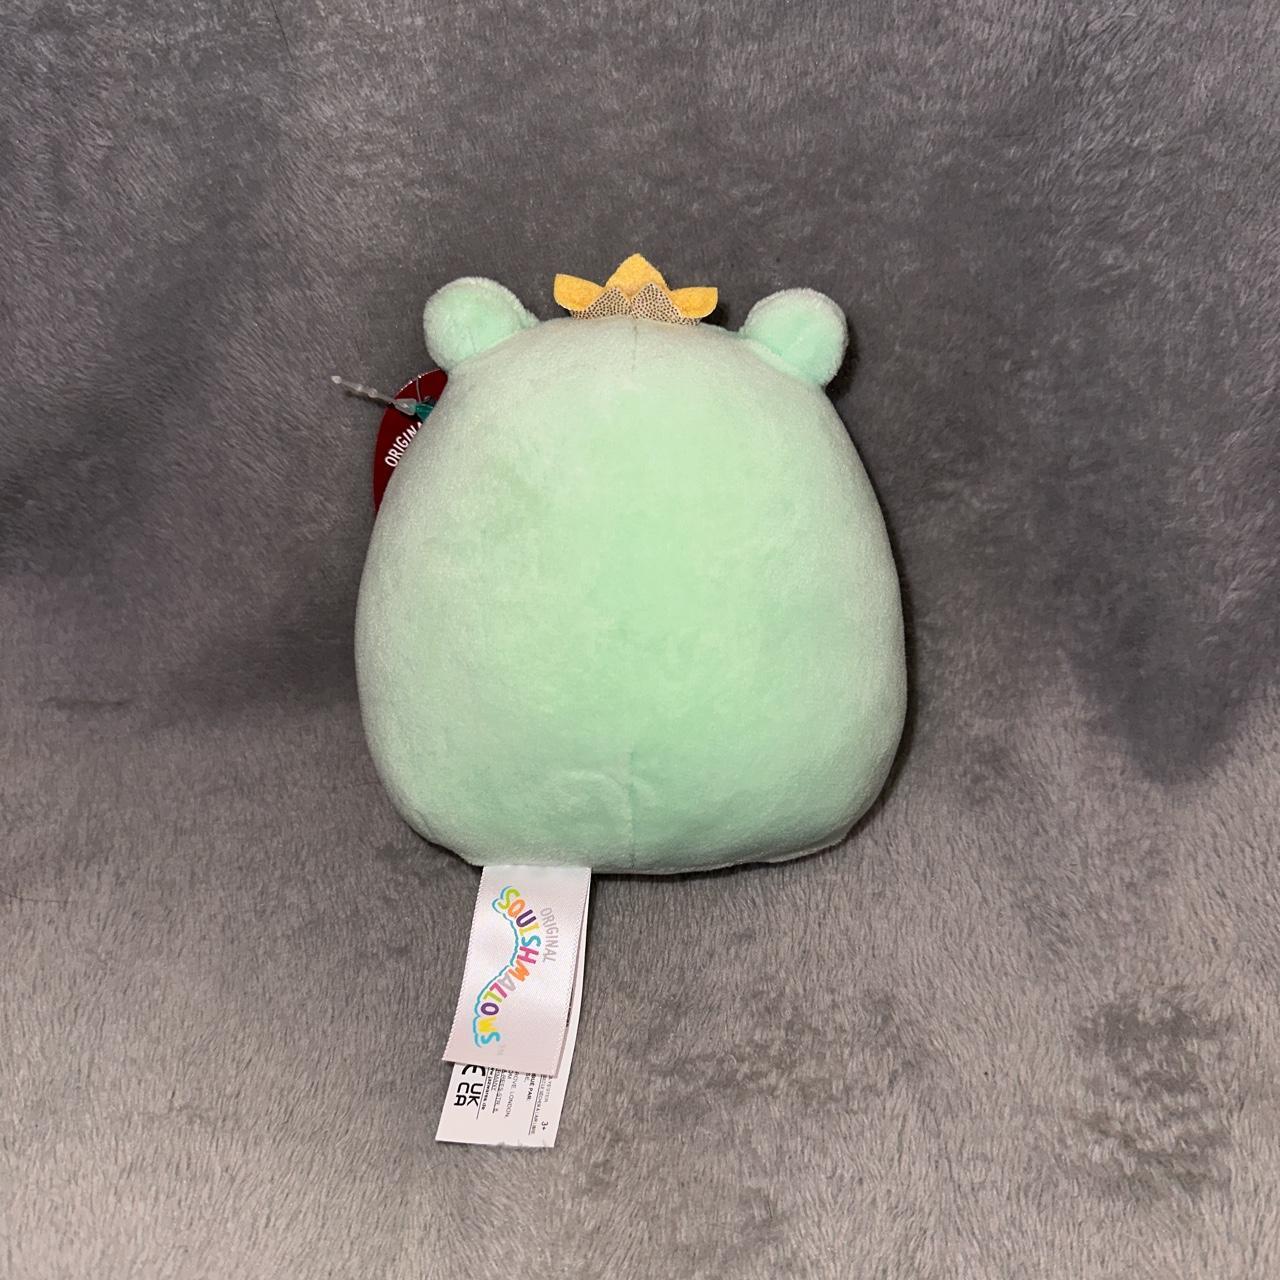 Fenra Squishmallow Frog!!! NWT 5”, Green frog with